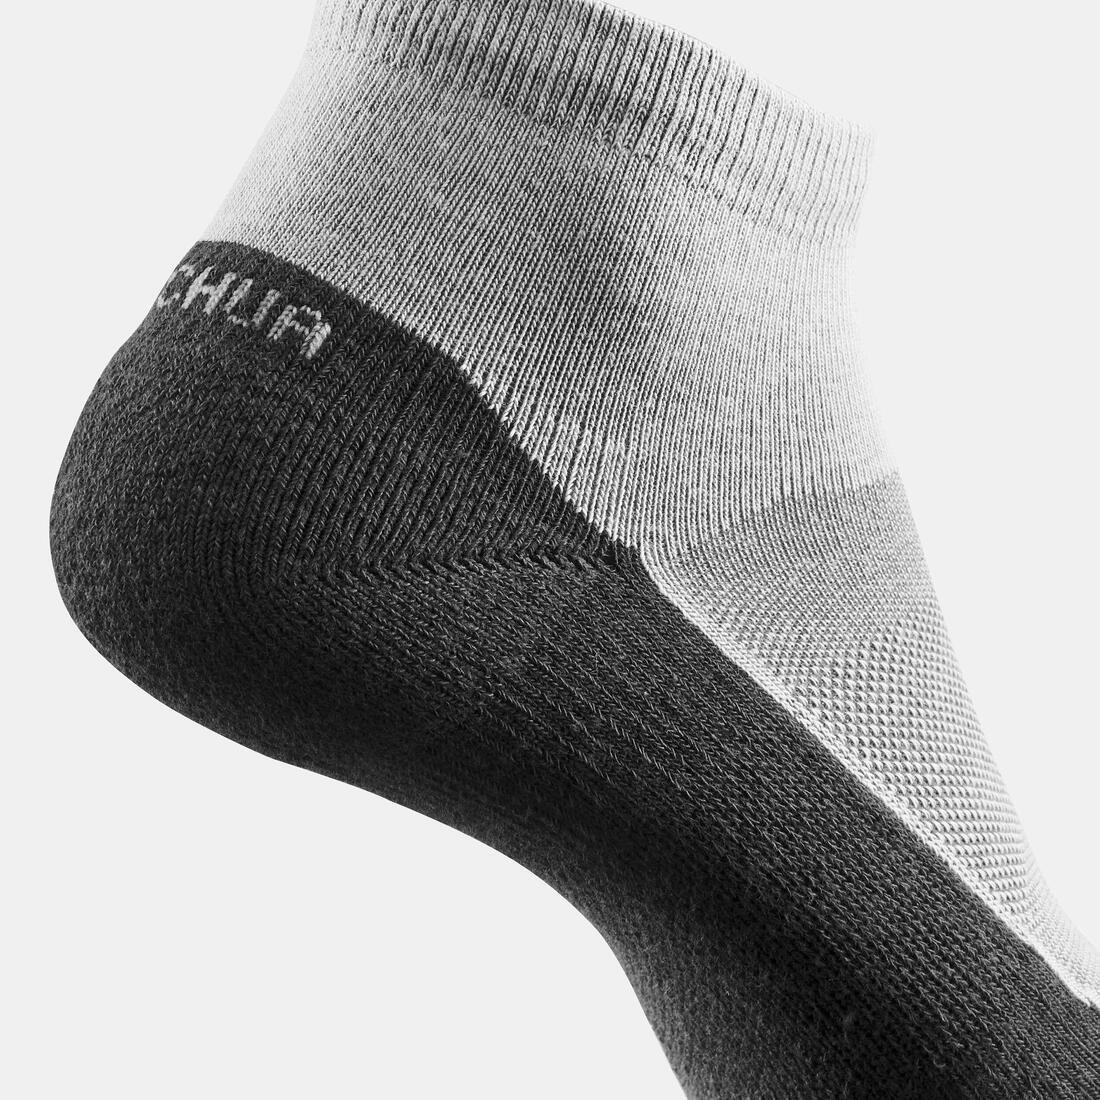 QUECHUA - Sock Hike 50 Mid - Pack Of 2 Pairs, Grey